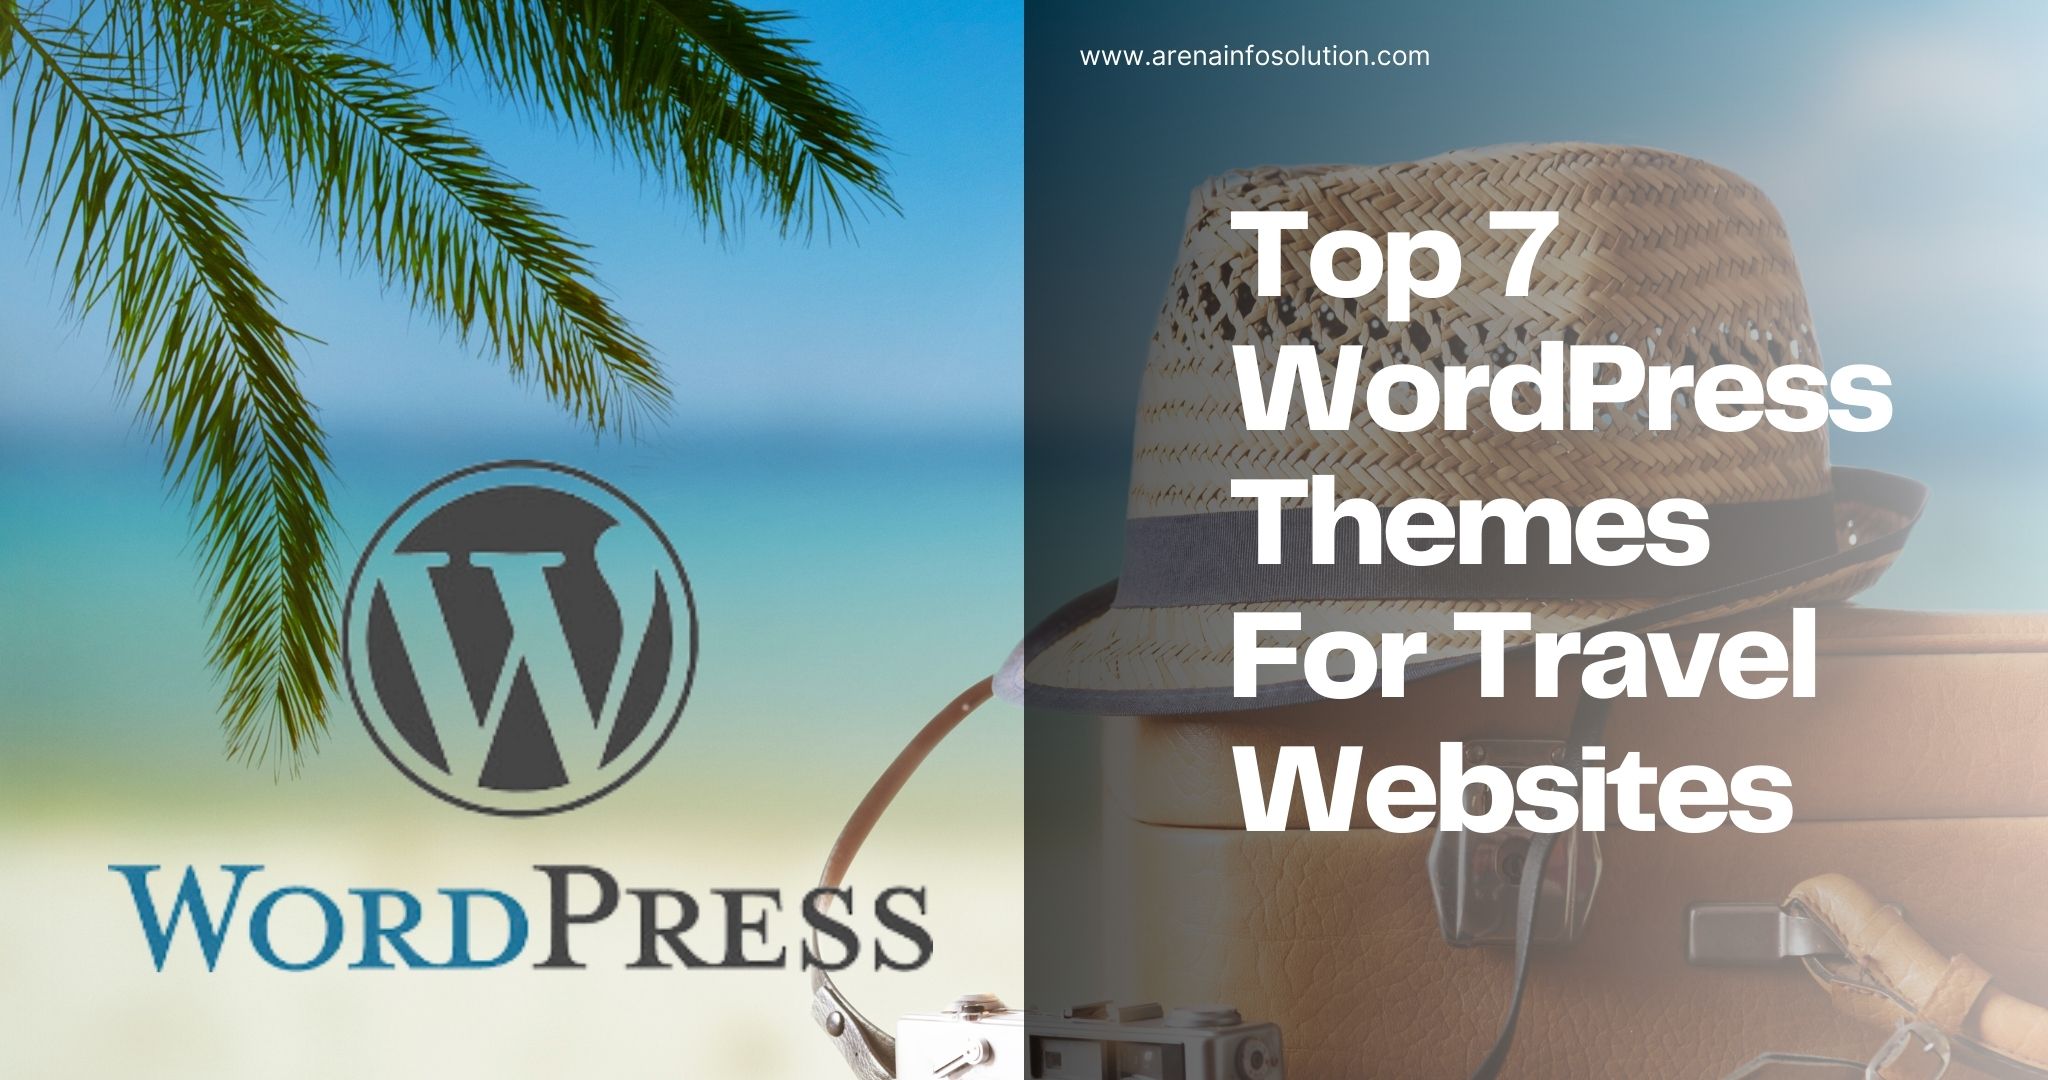 Top 7 WordPress Themes for Travel Websites